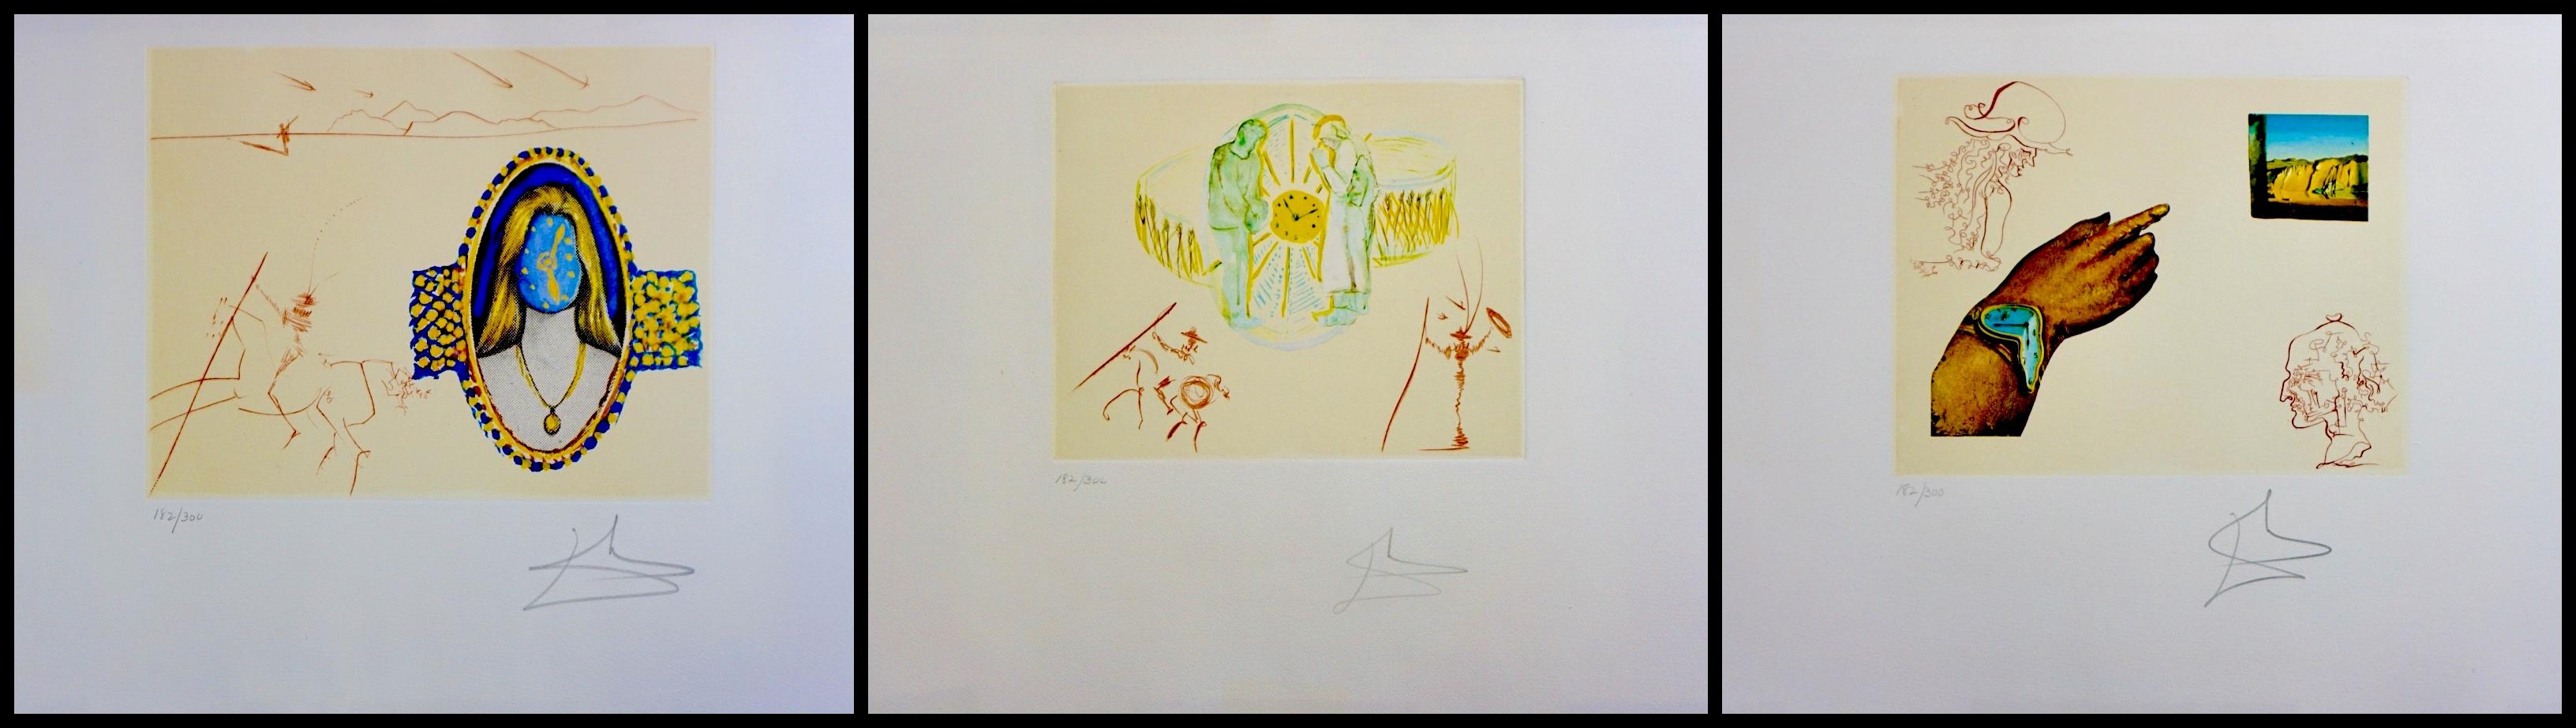 Salvador Dalí Figurative Print - The Cycles of Life Suite 